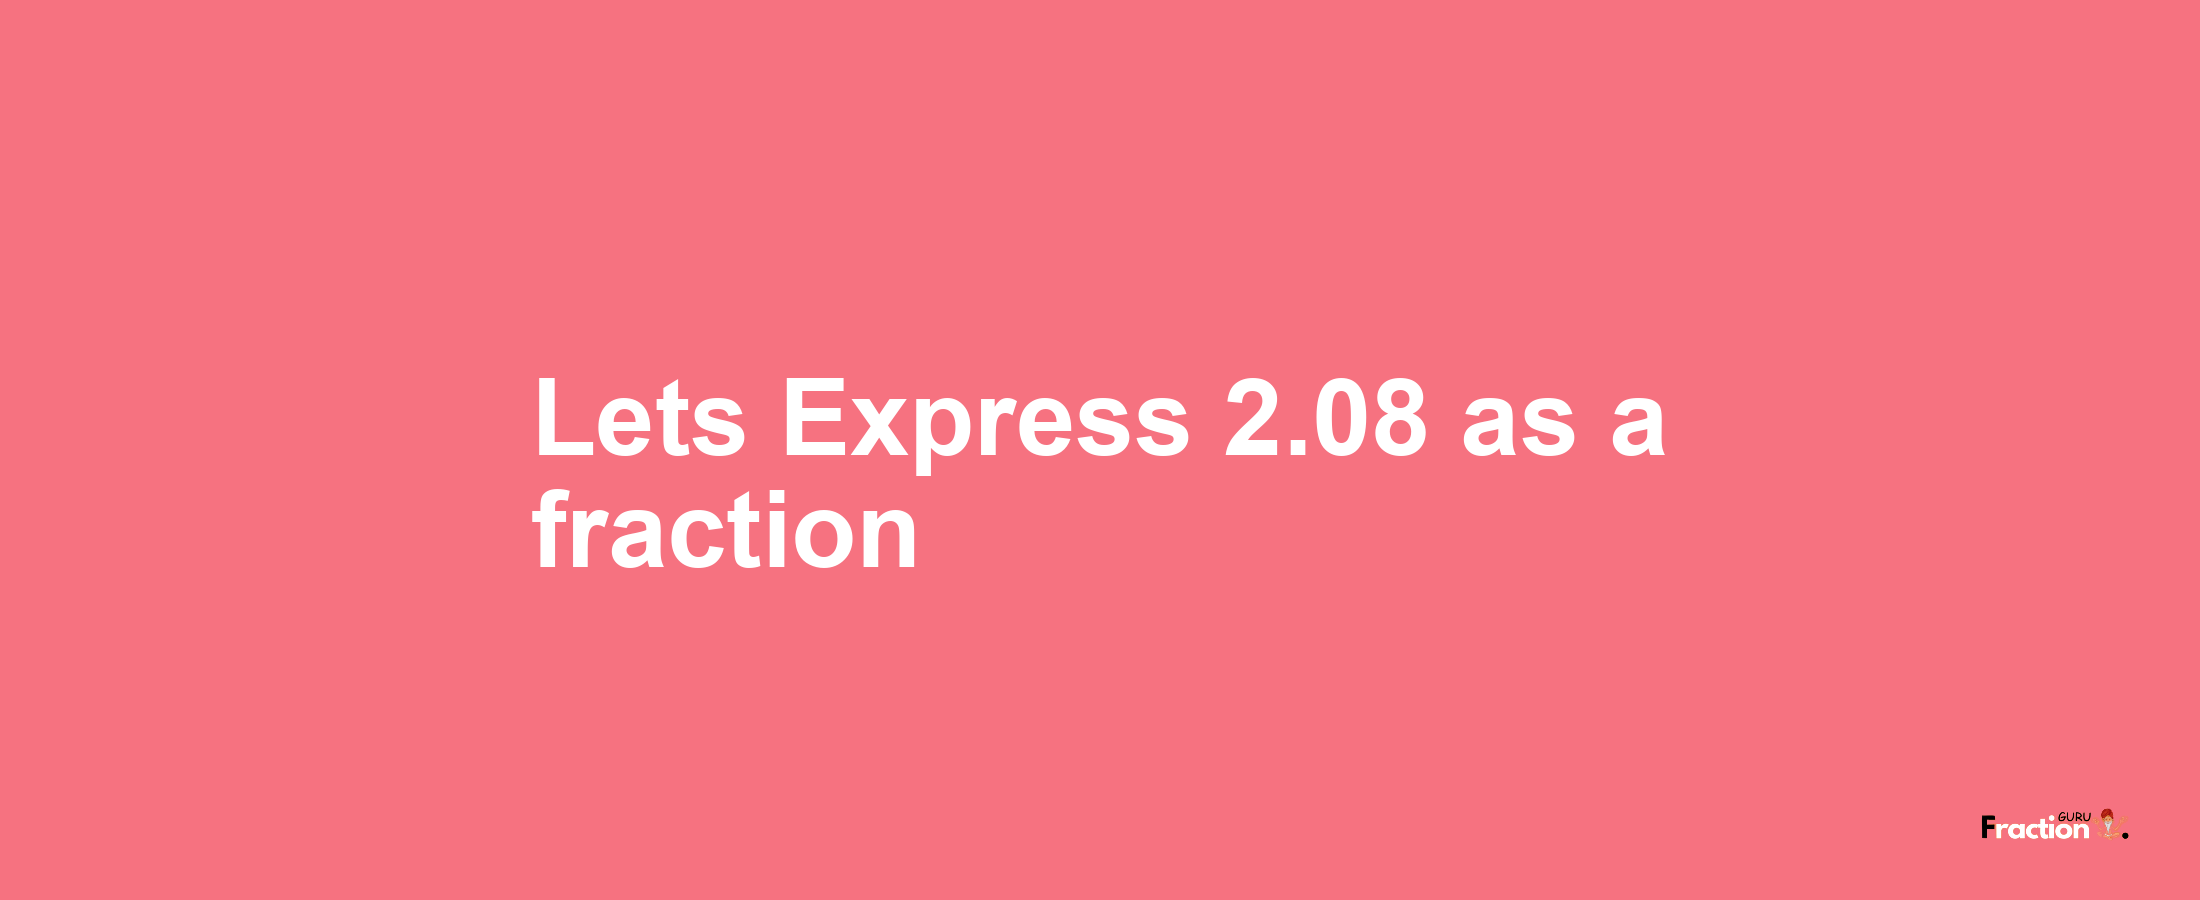 Lets Express 2.08 as afraction